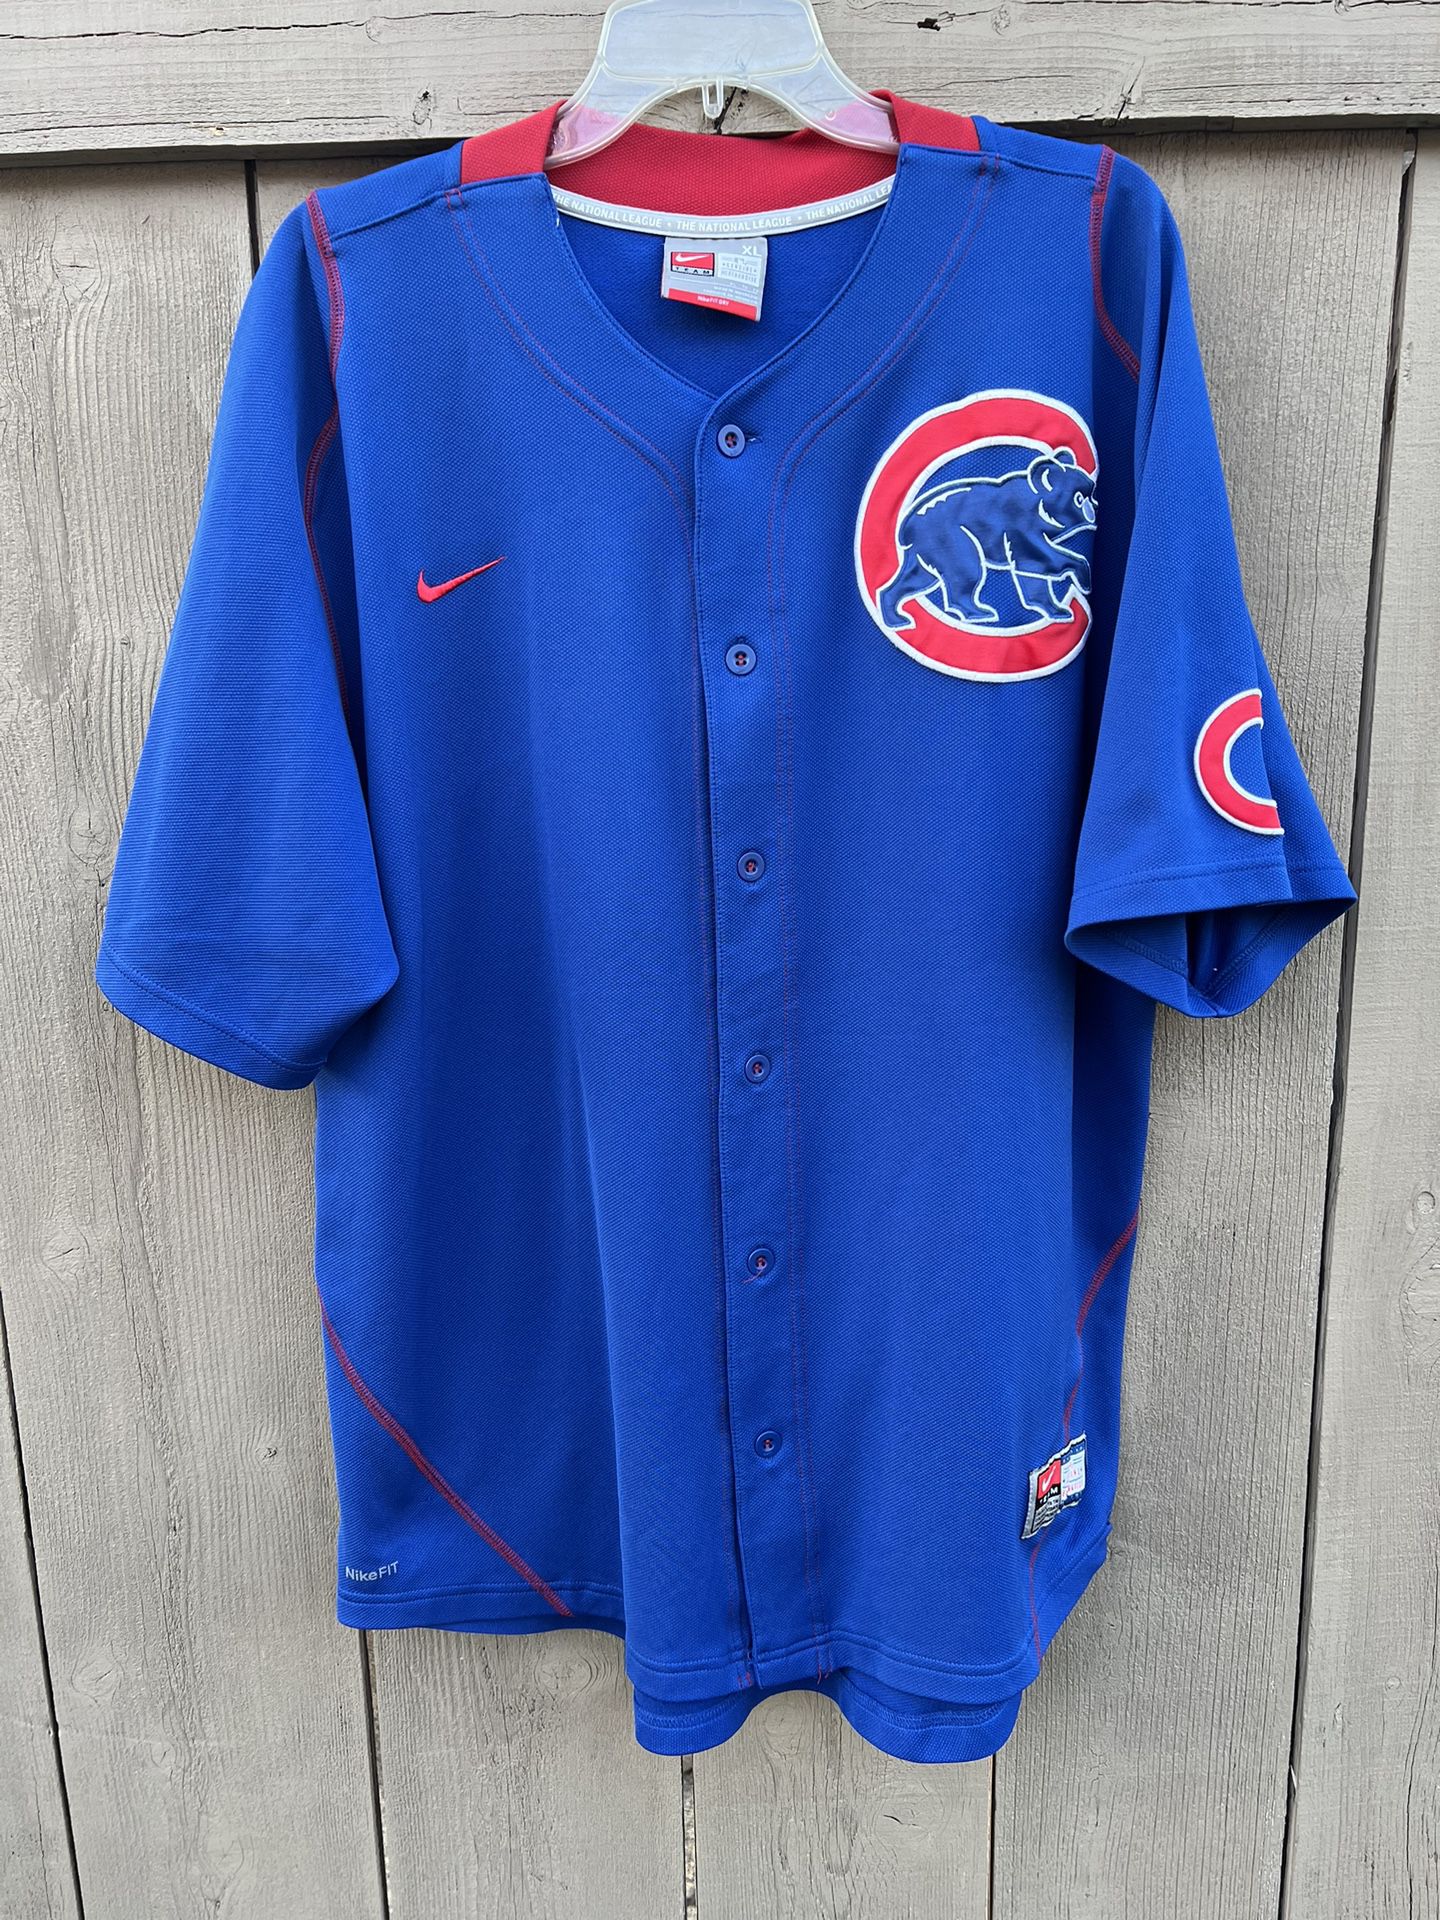 Team Nike Fit Dry Chicago Cubs MLB Blue Jersey Size XL Xtra Large